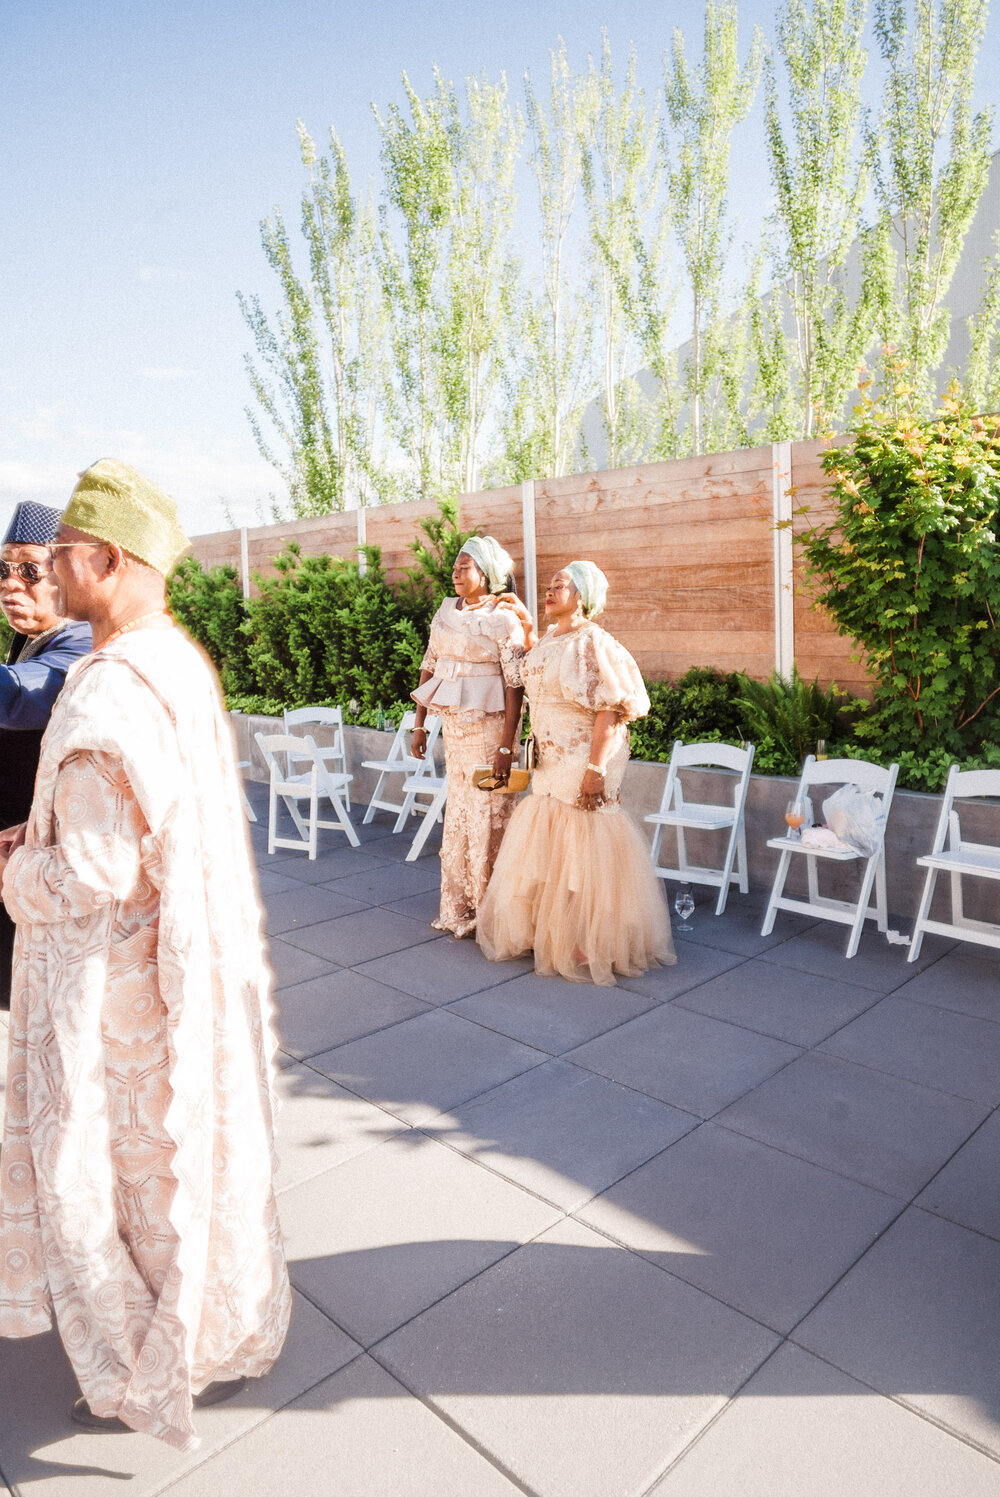 Multicultural Seattle Wedding Inspiration